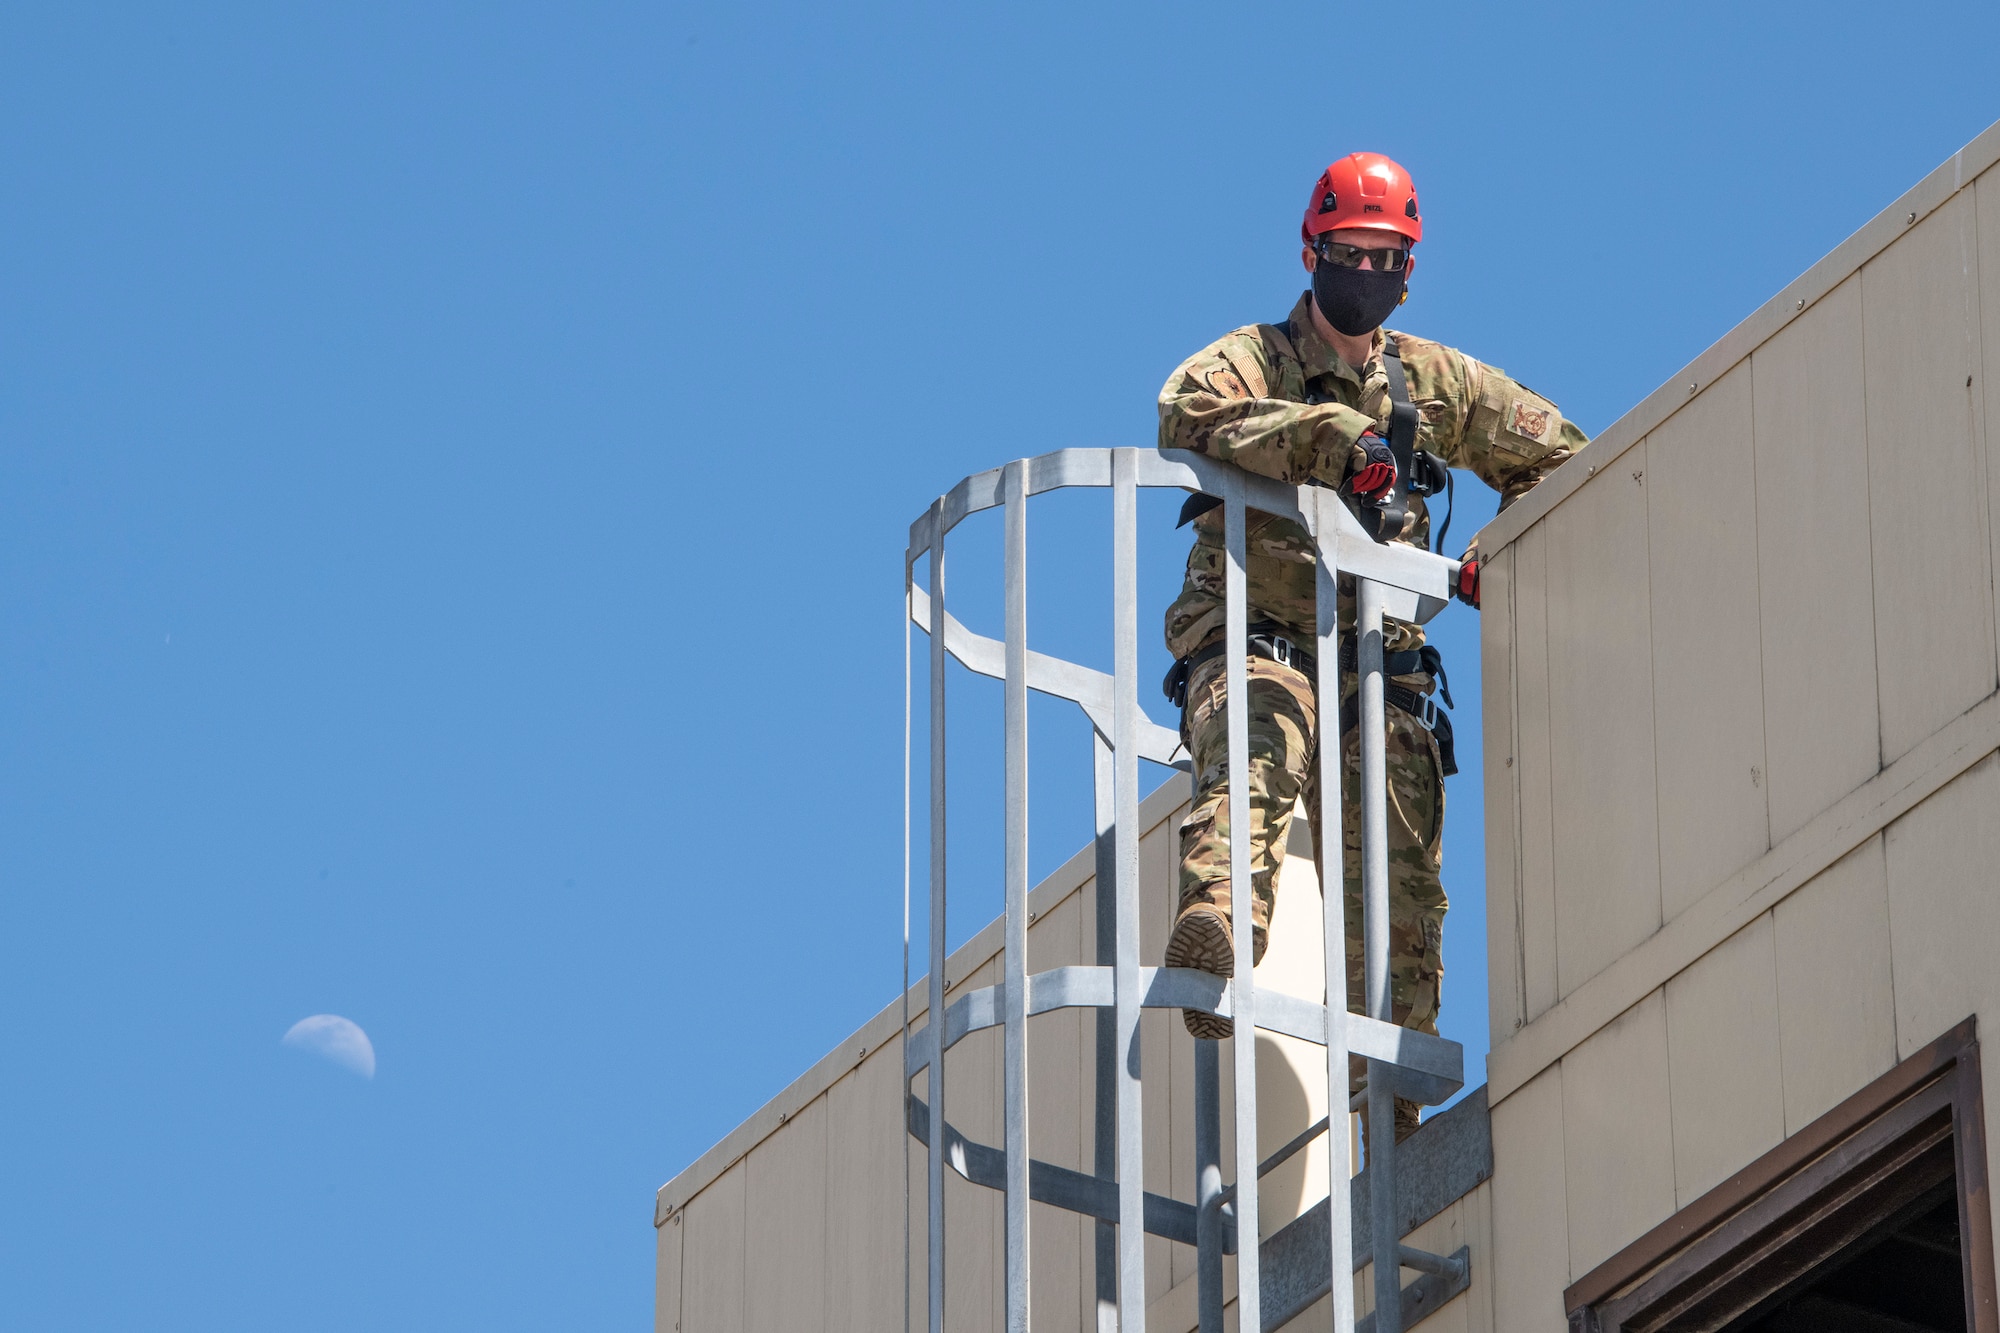 U.S. Air Force Staff. Sgt. Daniel Robinson, 60th Civil Engineer Squadron lead firefighter, climbs a ladder that leads to the roof of the structure used to train fire protection personnel April 19, 2021, at the Travis Fire and Emergency Services training facility at Travis Air Force Base, California. The training demonstration provided senior leadership with a clear picture of the technical rescue capabilities for multi-story building and confined space rescues conducted by Travis AFB emergency response personnel. (U.S. Air Force photo by Heide Couch)